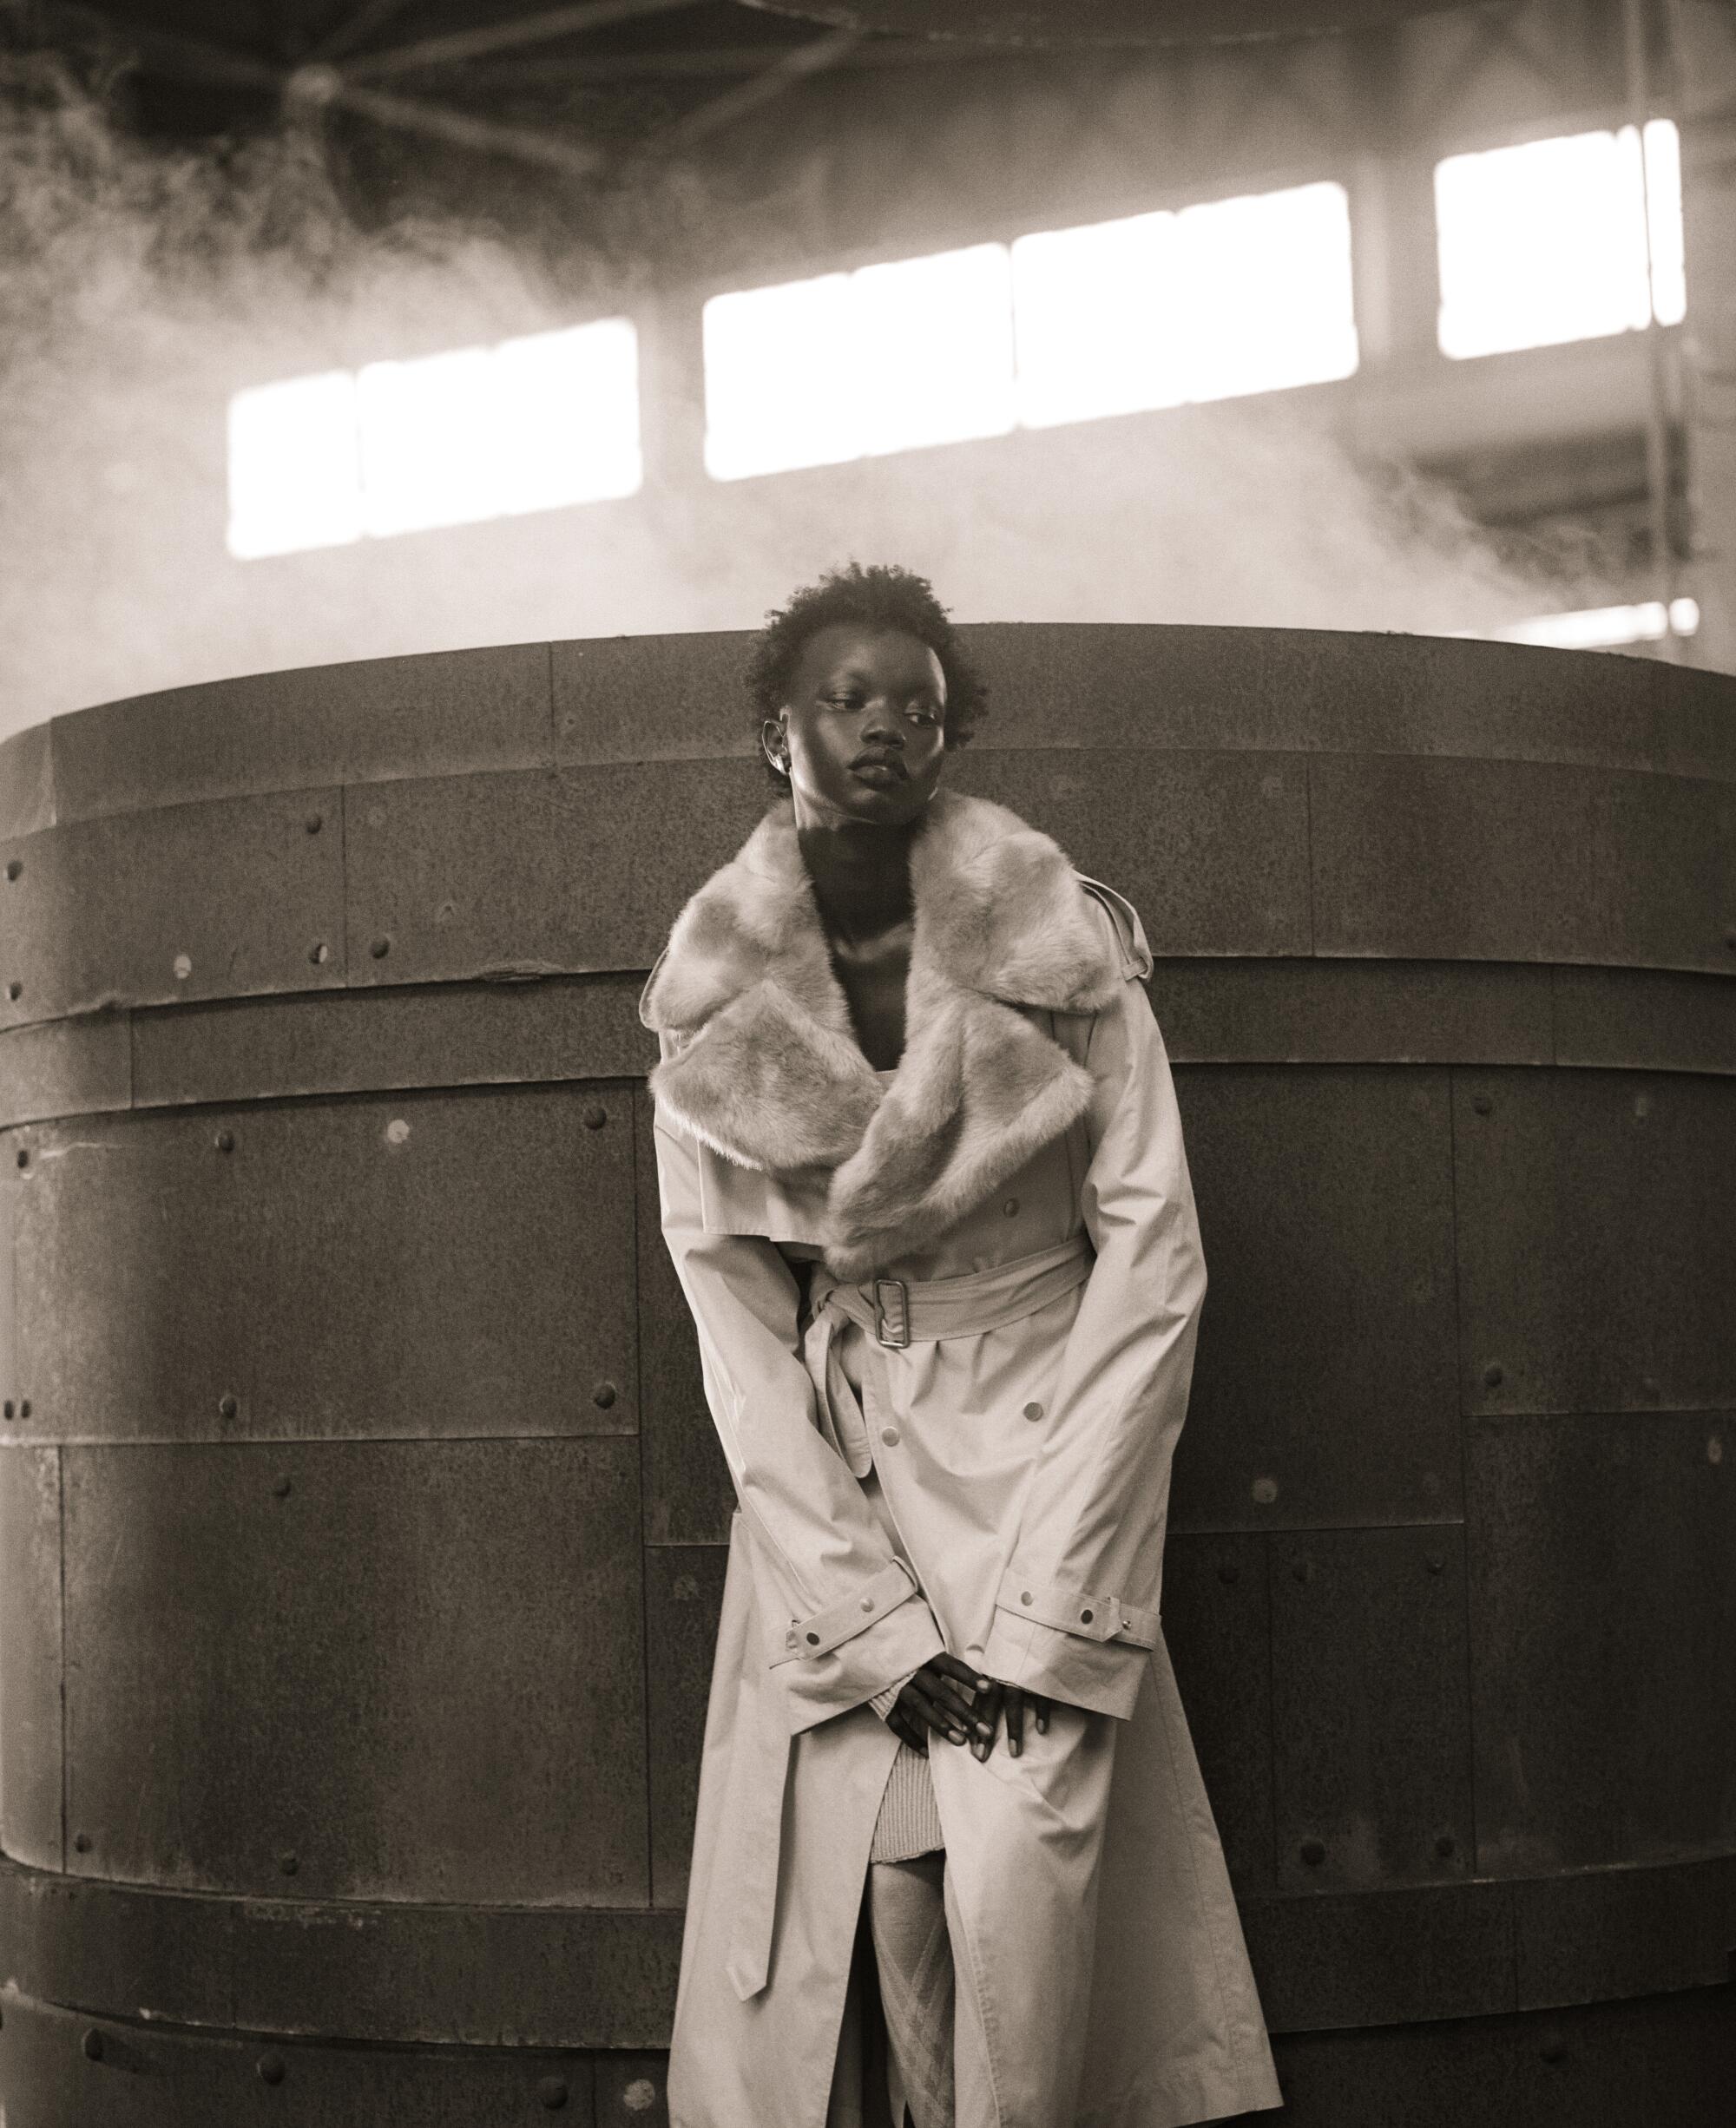 Sepia-toned photo of a model in a trench coat in front of a vat that appears to be steaming